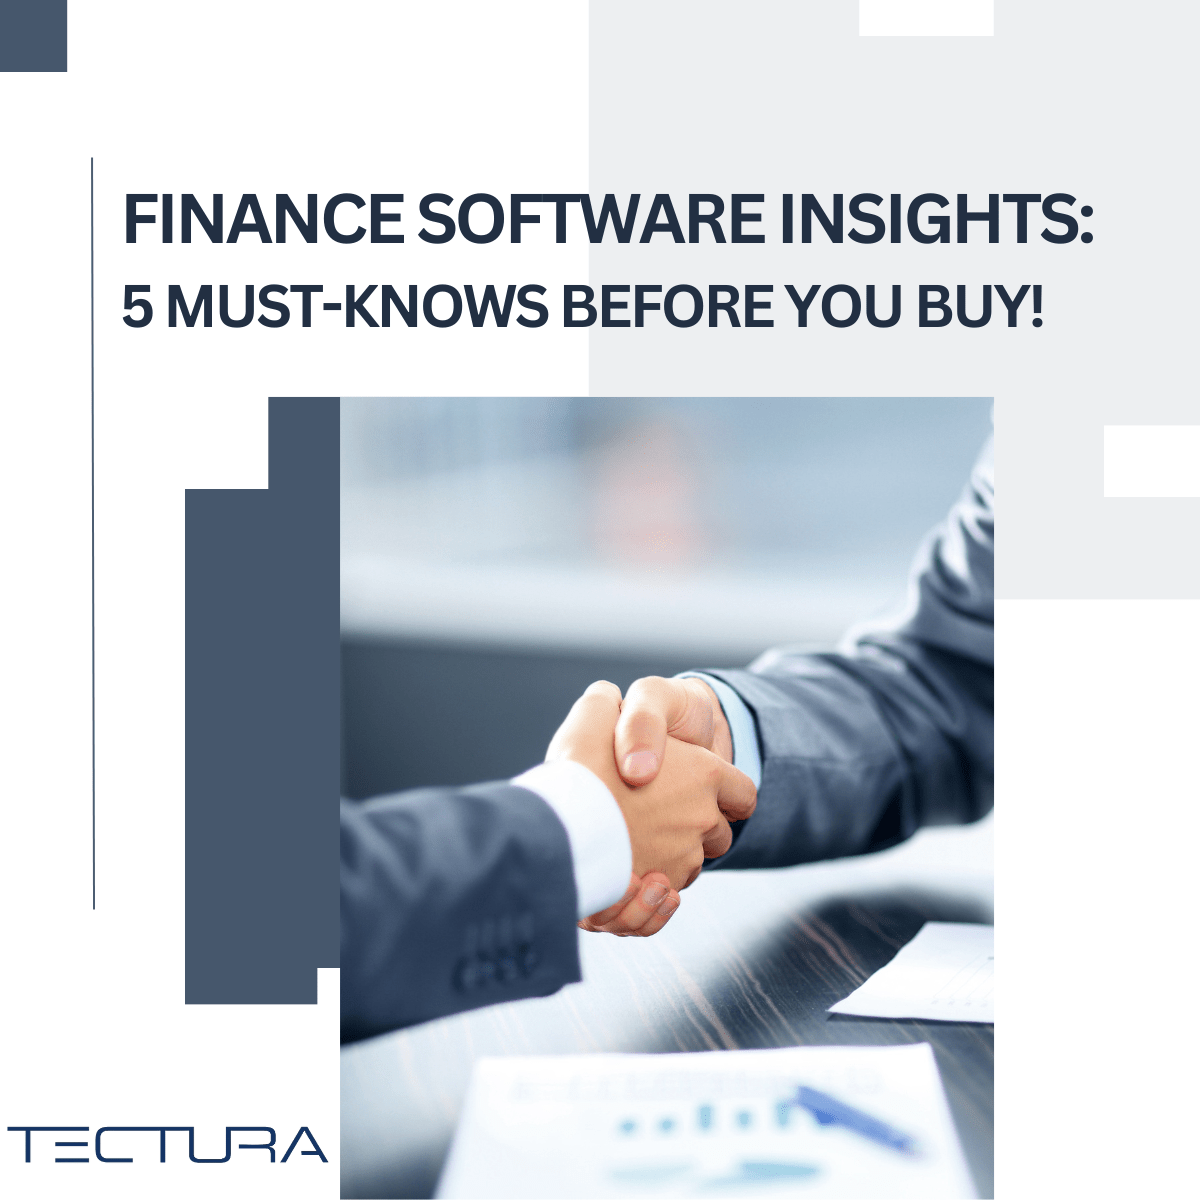 5 Must-Knows Before You Buy Finance Software